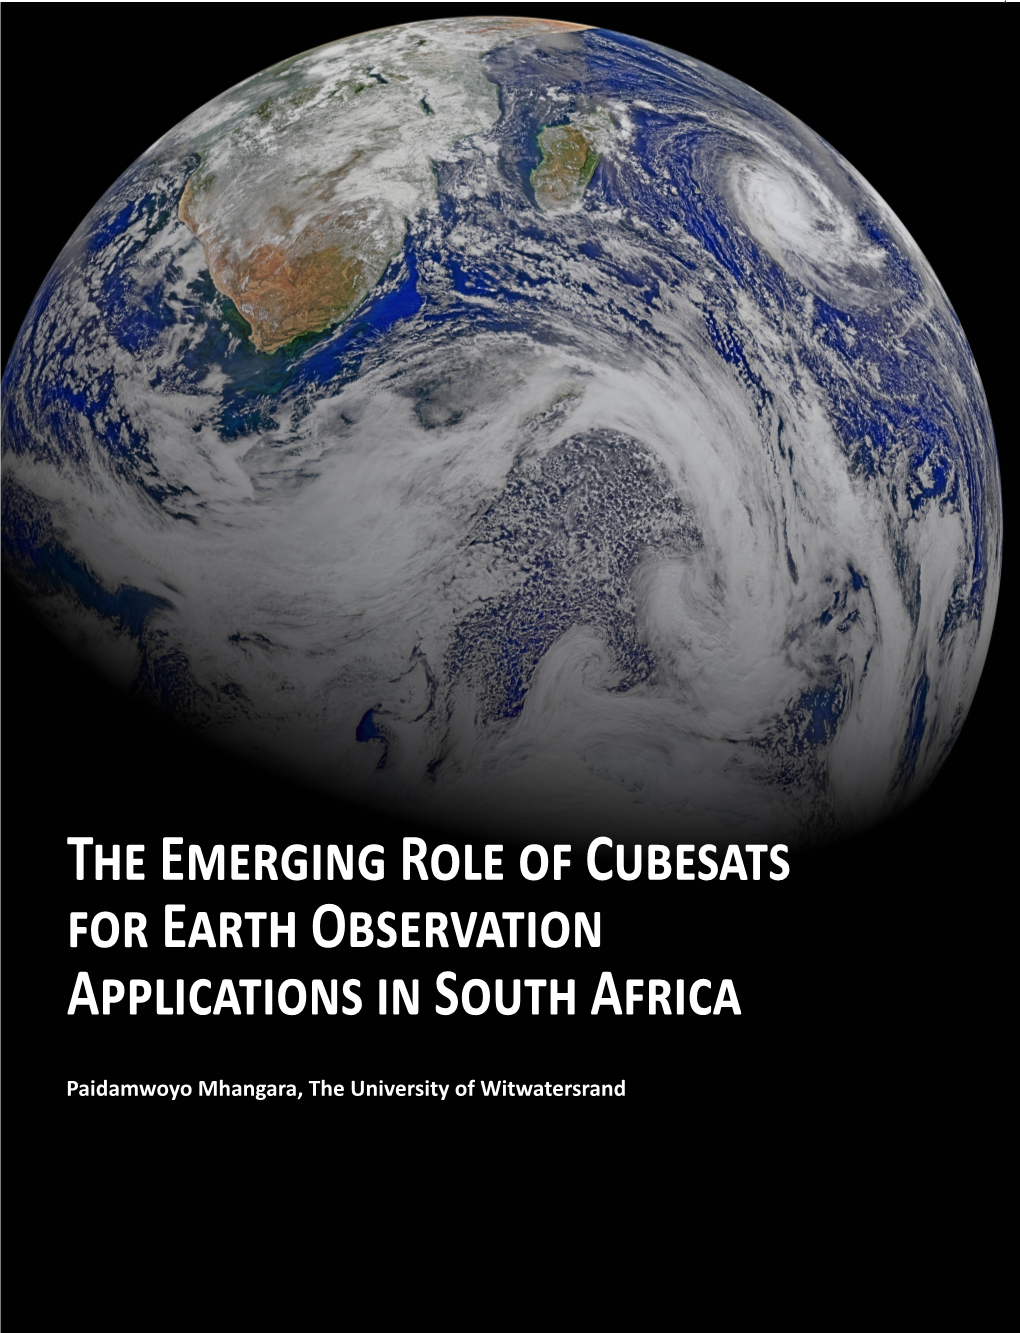 The Emerging Role of Cubesats for Earth Observation Applications in South Africa